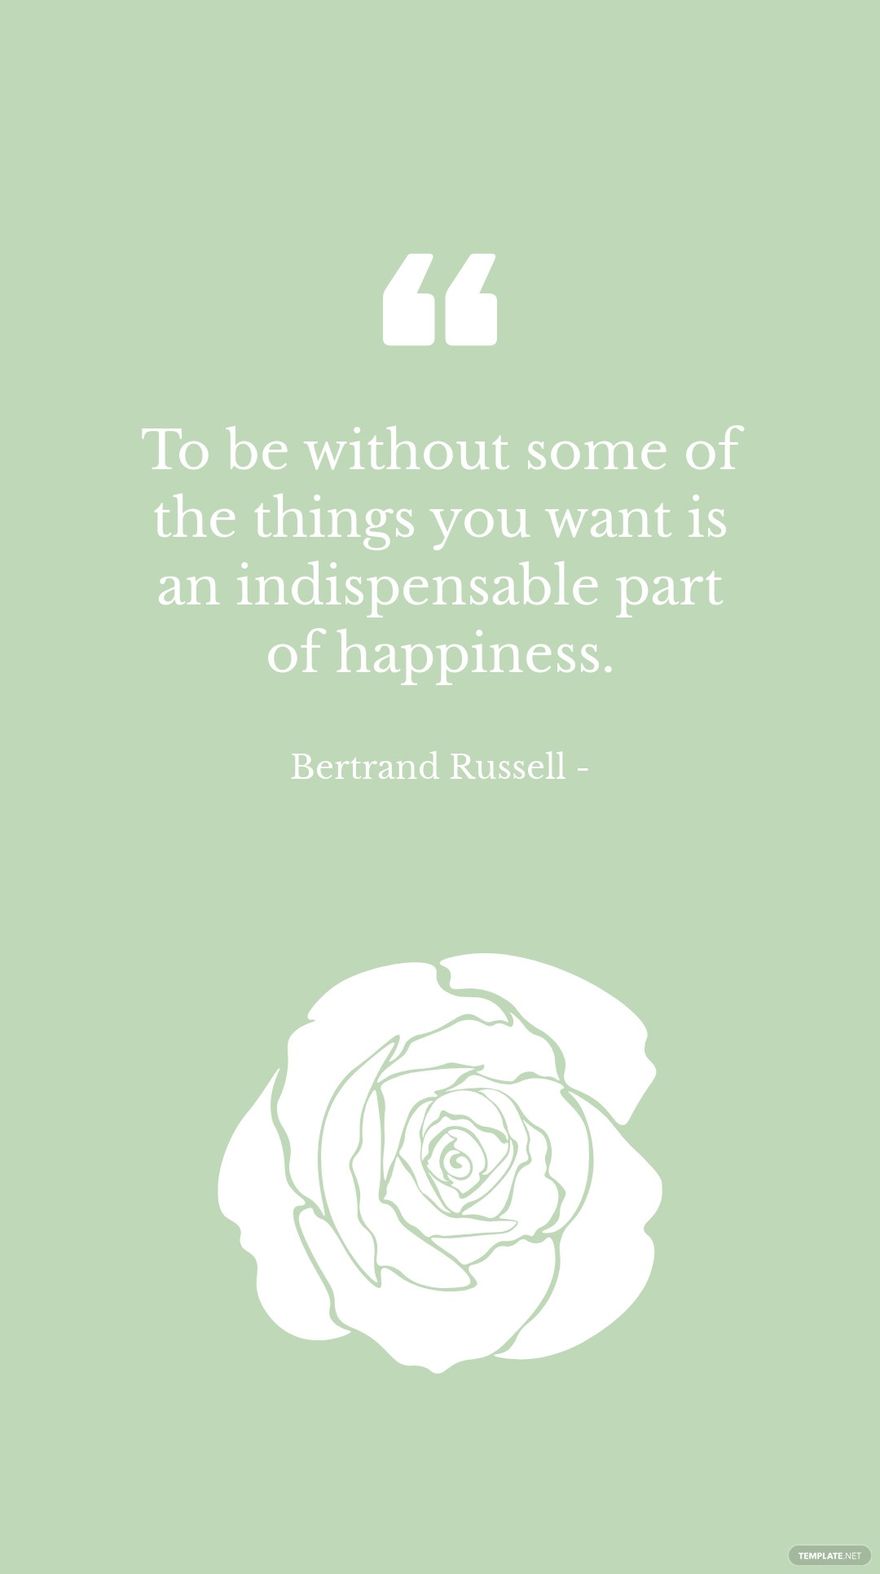 Bertrand Russell - To be without some of the things you want is an indispensable part of happiness.